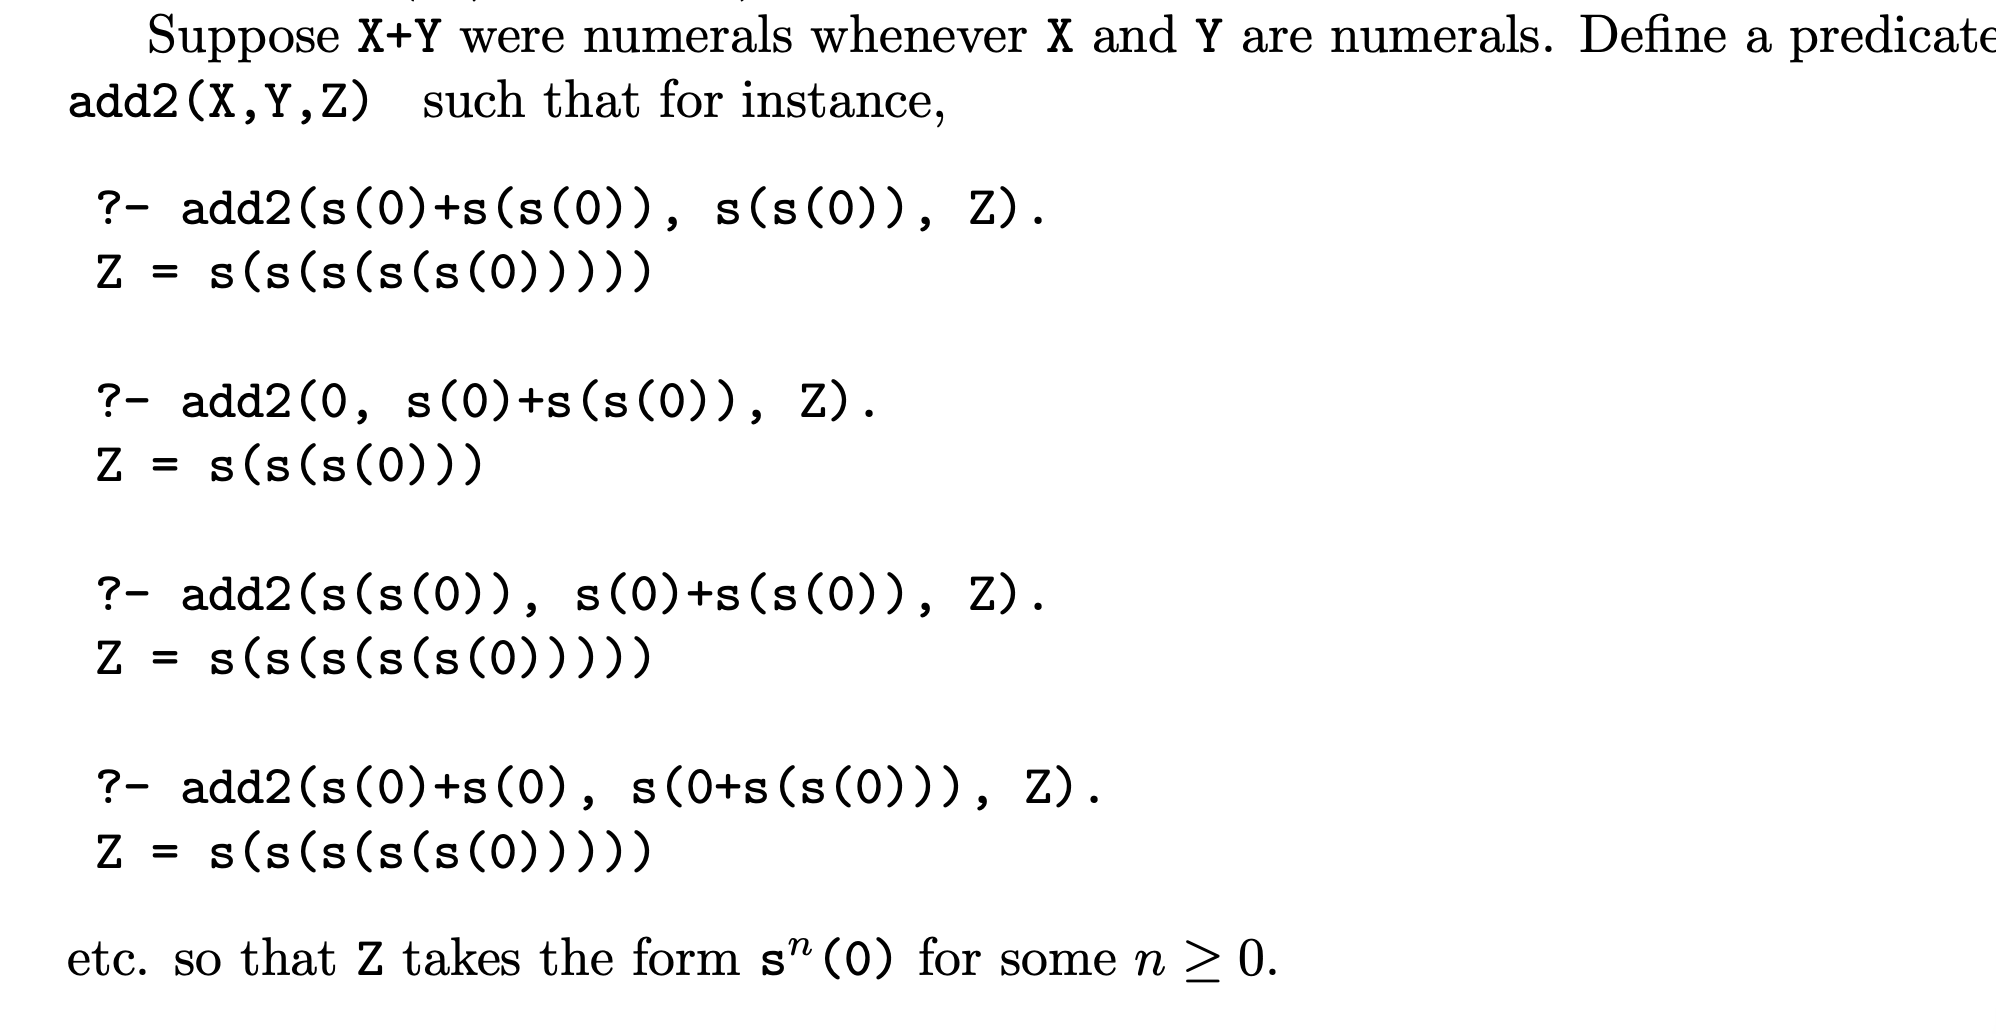 Suppose X+Y were numerals whenever X and Y are numerals. Define a predicate add2 (X, Y, Z) such that for